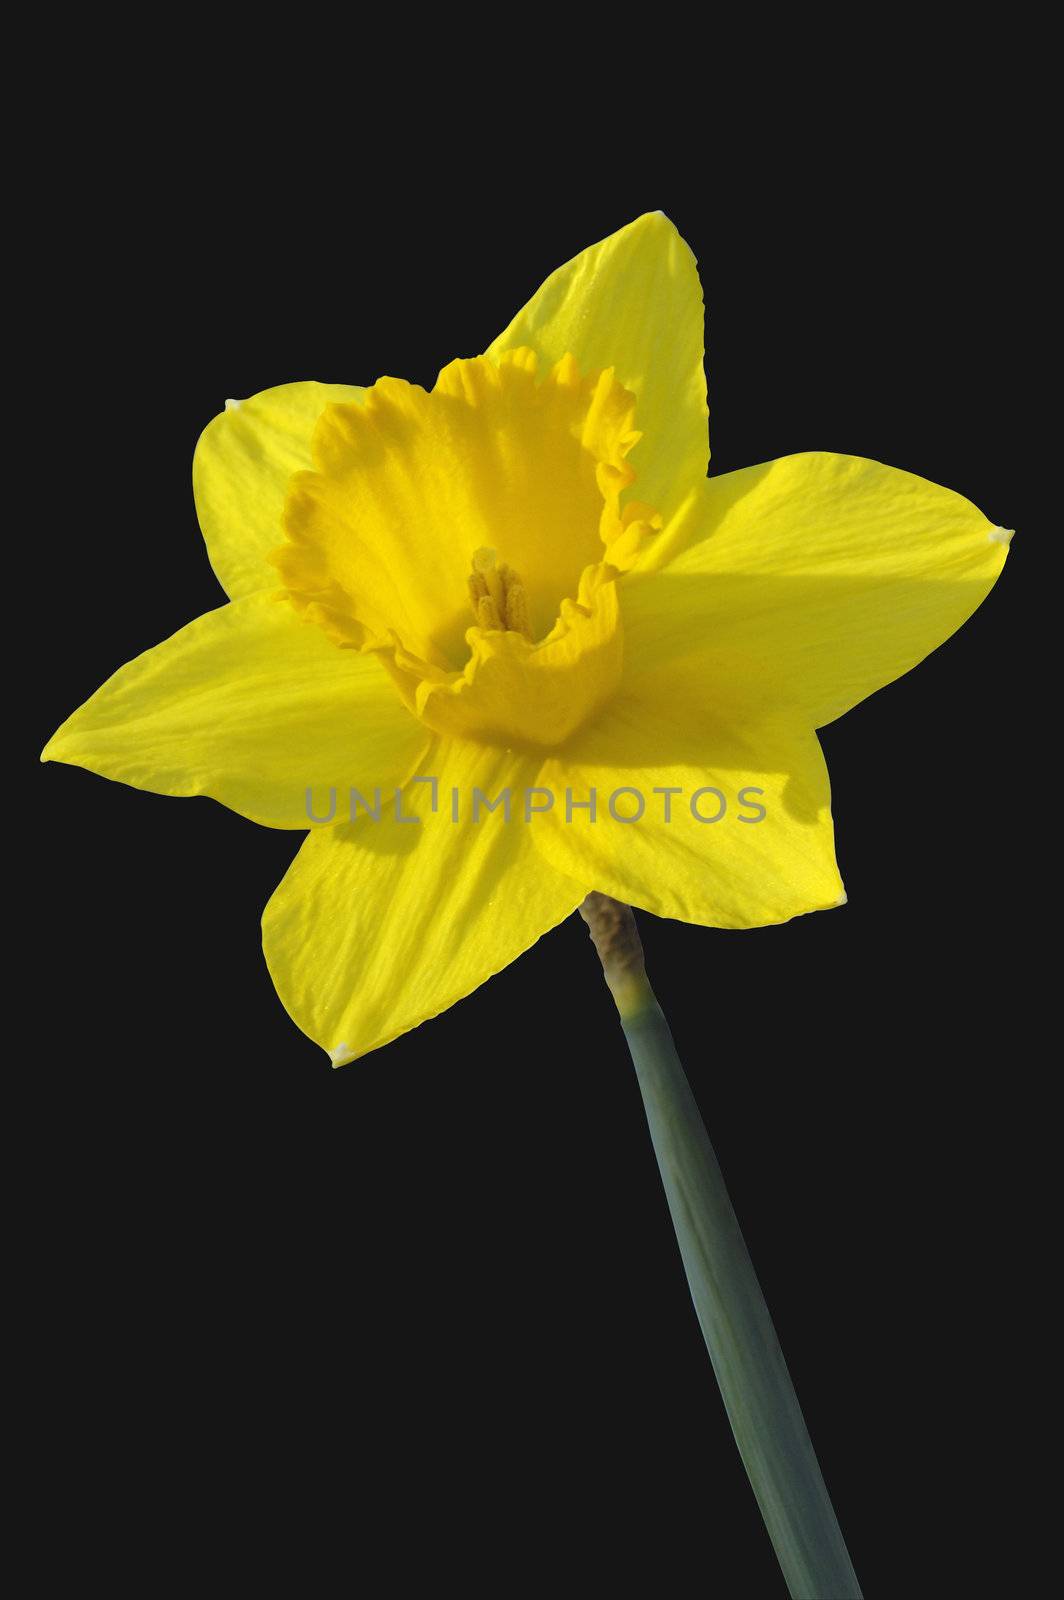 A solitary daffodil, isolated on black.